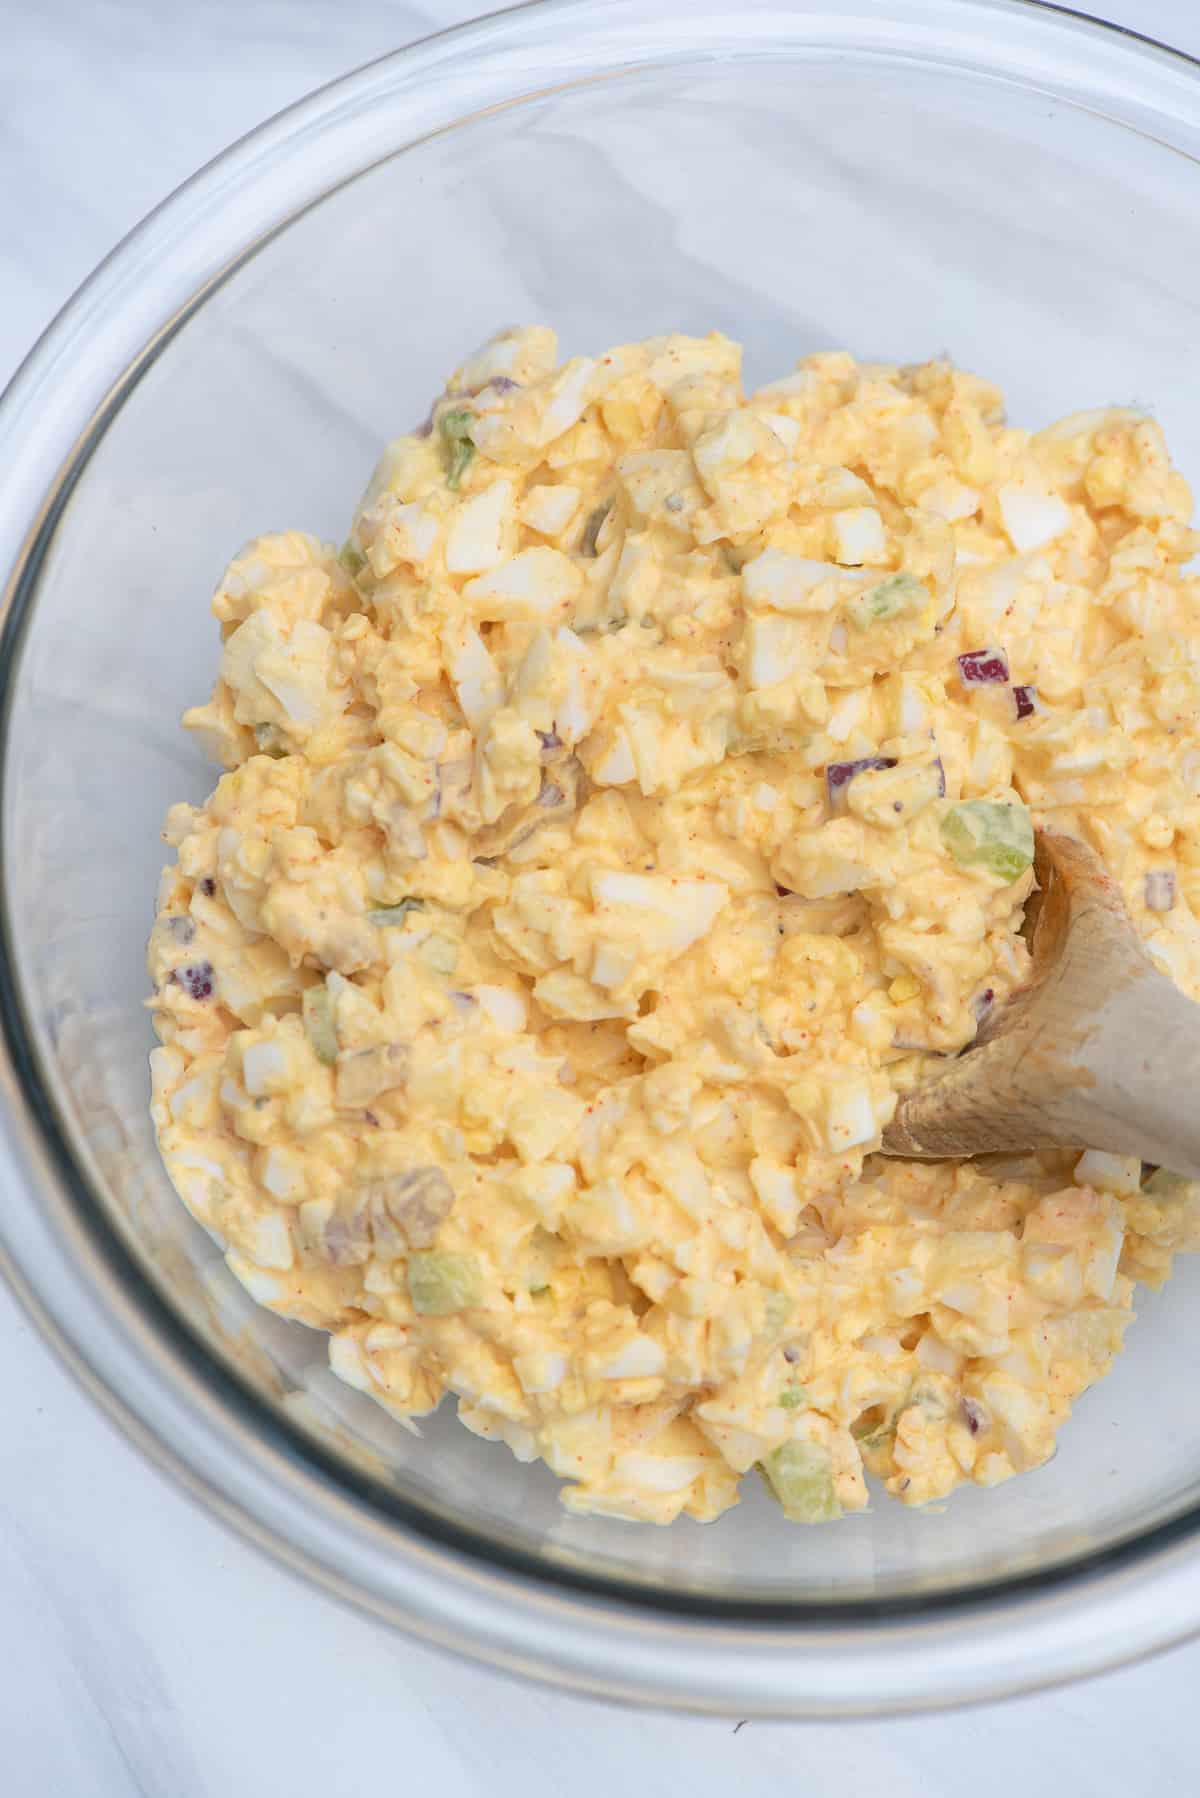 Egg salad in a bowl with a wooden spoon.